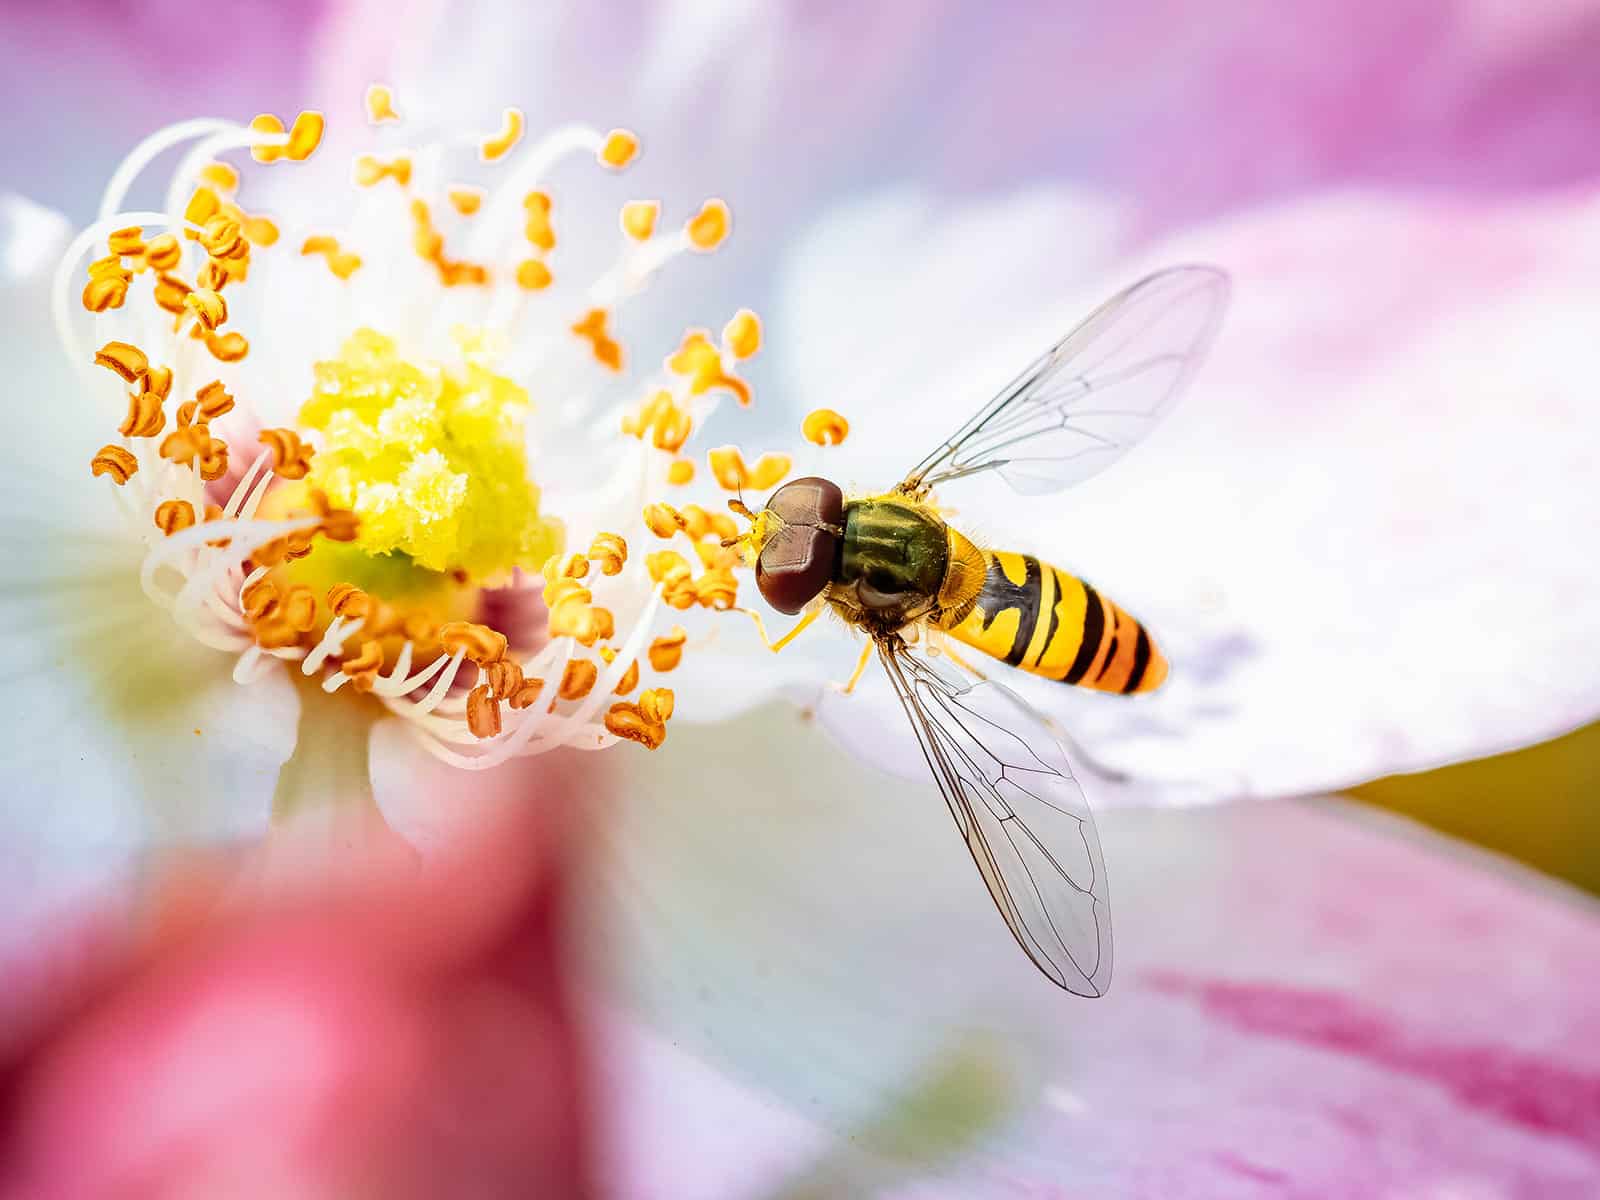 Extreme close-up of a hoverfly feeding on nectar and pollen from a white and pink flower